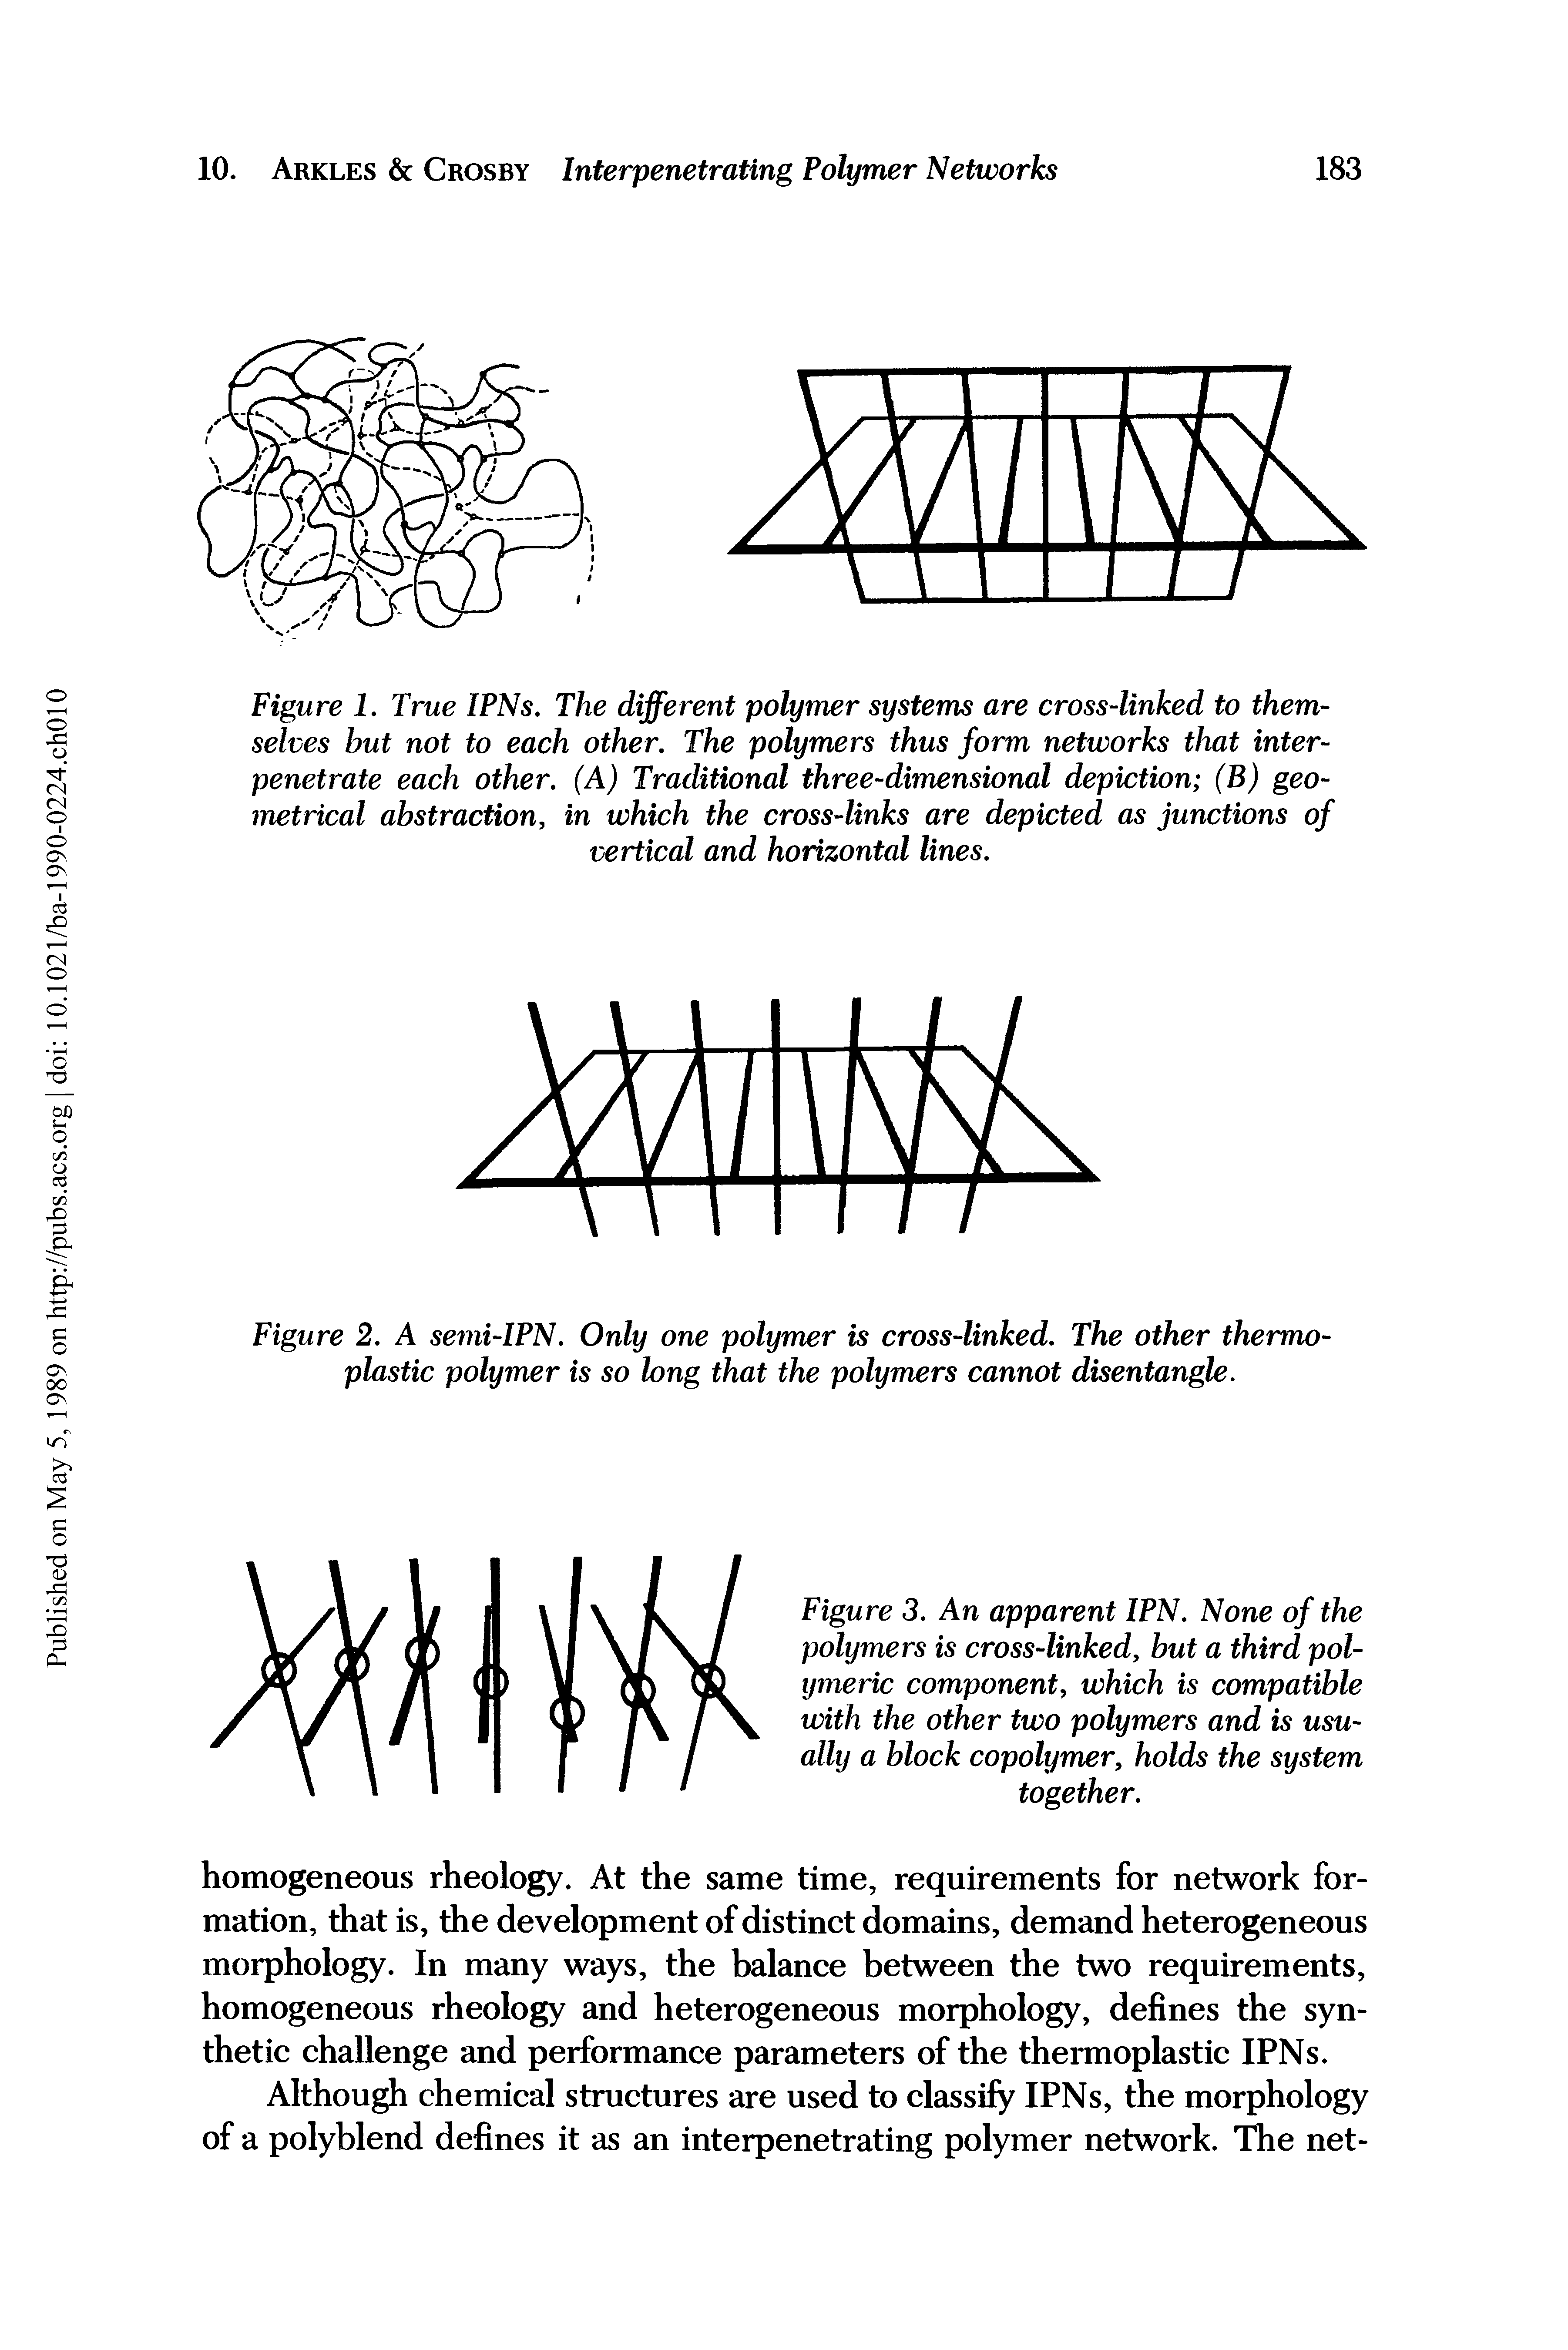 Figure 1, True IPNs. The different polytner systems are cross-linked to themselves but not to each other. The polymers thus form networks that interpenetrate each other. (A) Traditional three-dhnensional depiction (B) geometrical abstraction, in which the cross-links are depicted as junctions of vertical and horizontal lines.